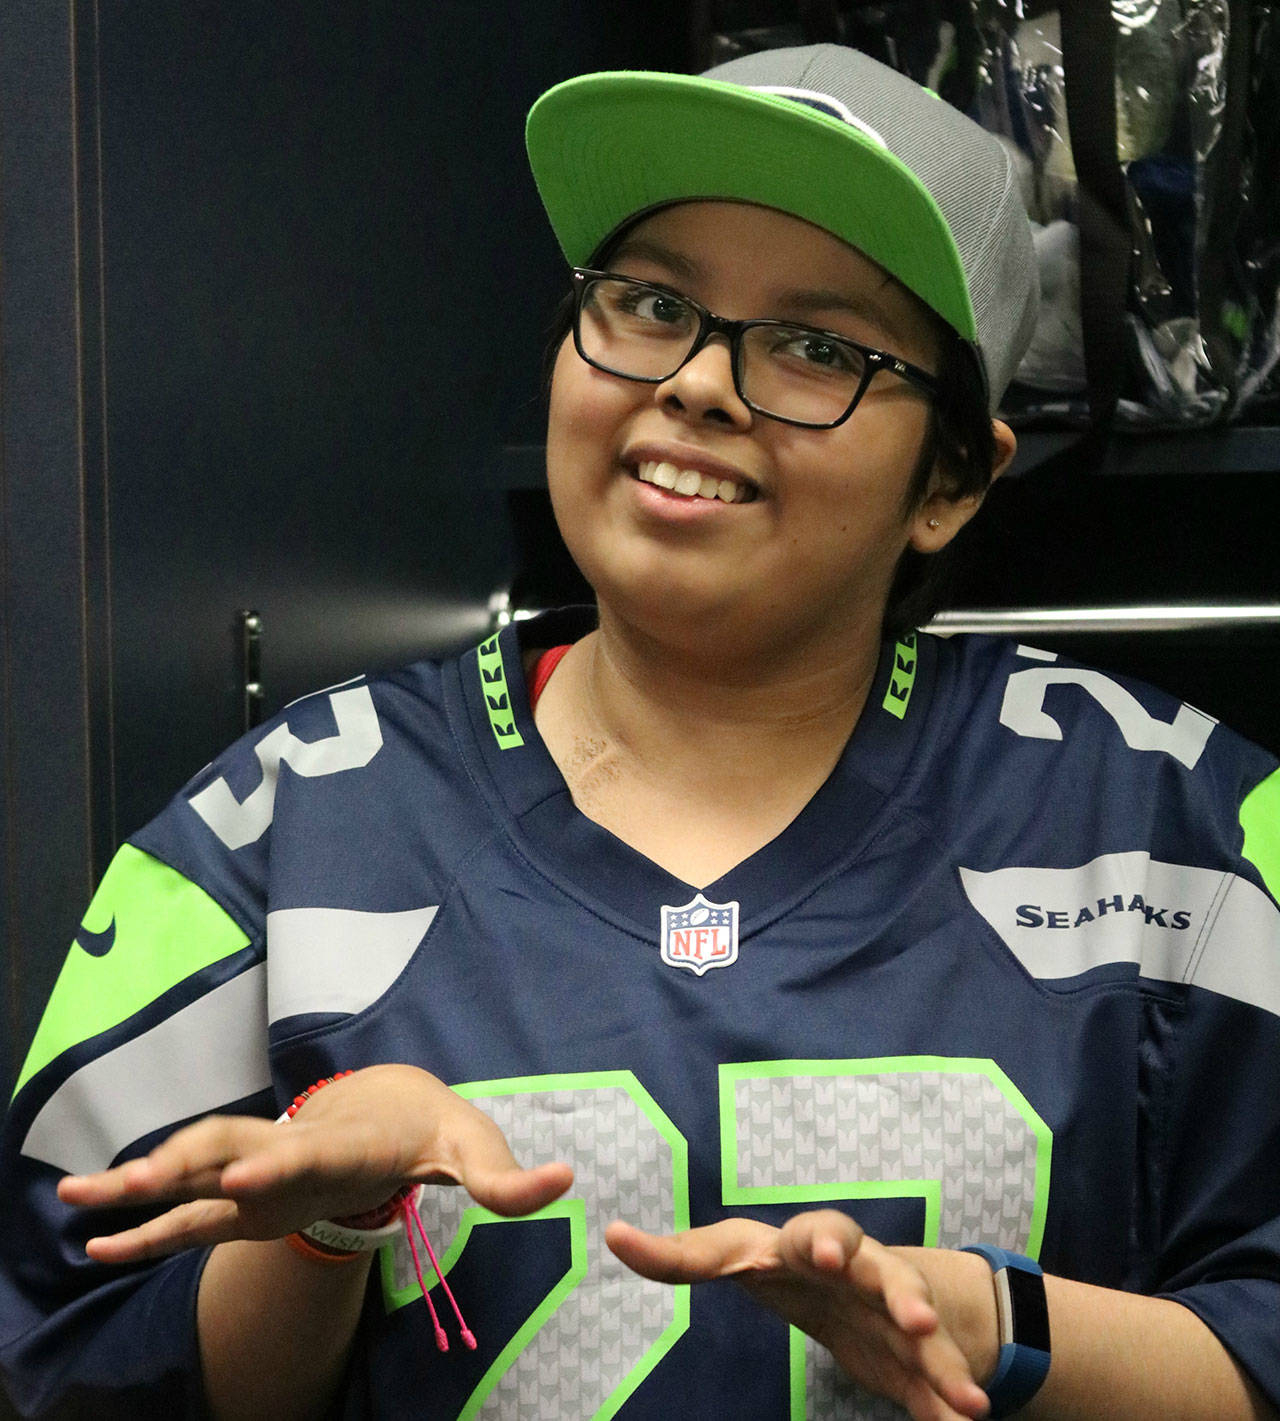 North Bend’s Paola Joaquin talks with family members in front of her personalized locker at CenturyLink Field in Seattle on Aug. 7. Andy Nystrom / staff photo